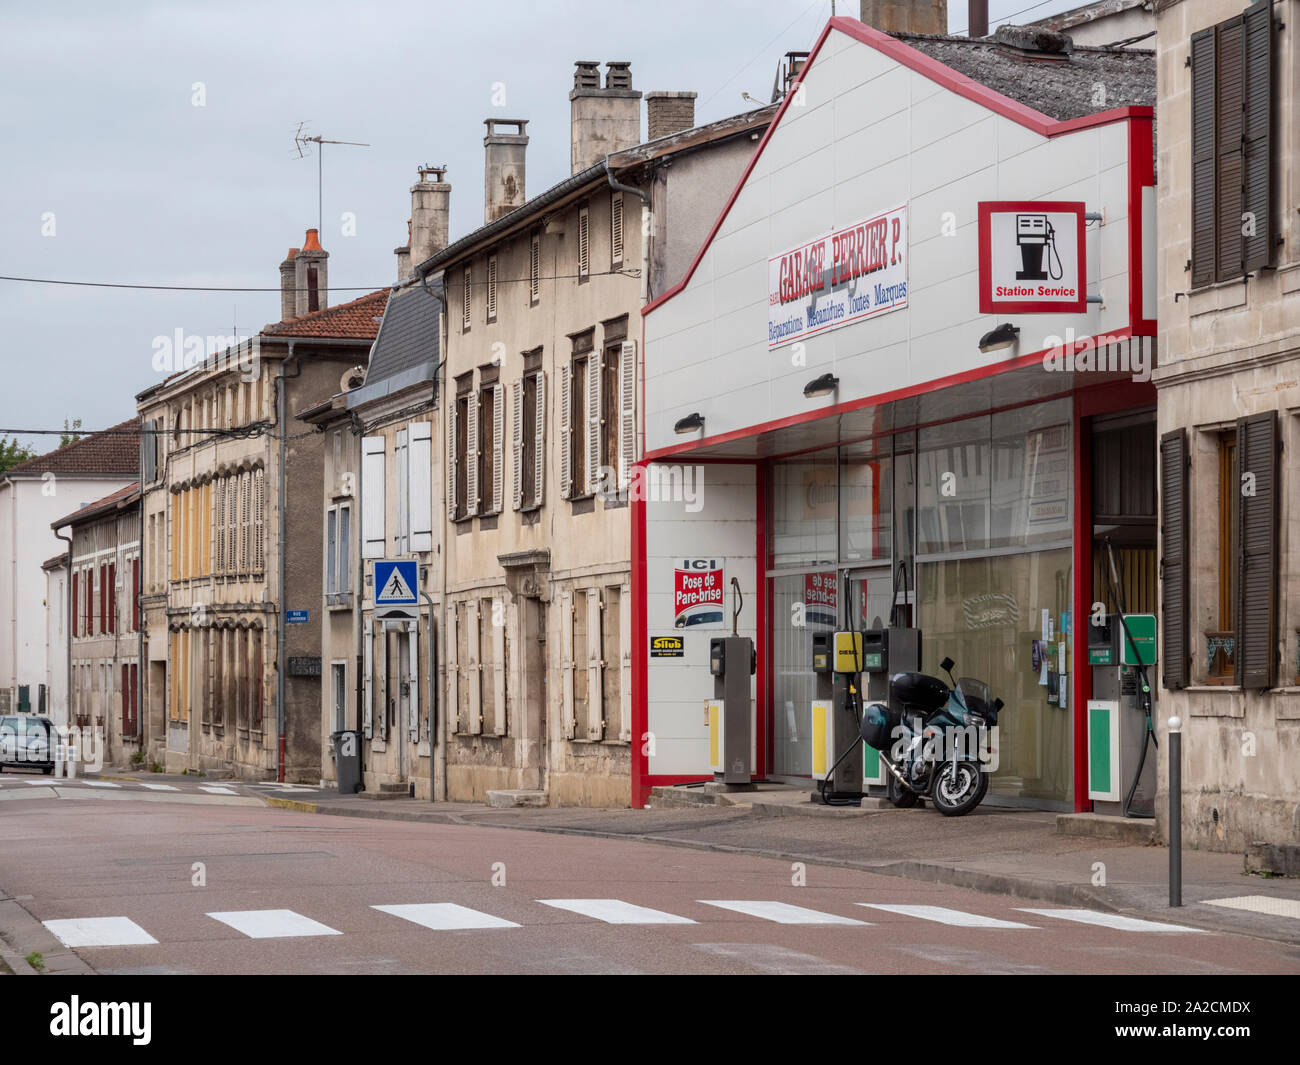 A street scene in the French village of Wassy in the Champagnes-Ardennes region of France showing a garage and shops and buildings lining the road. Stock Photo